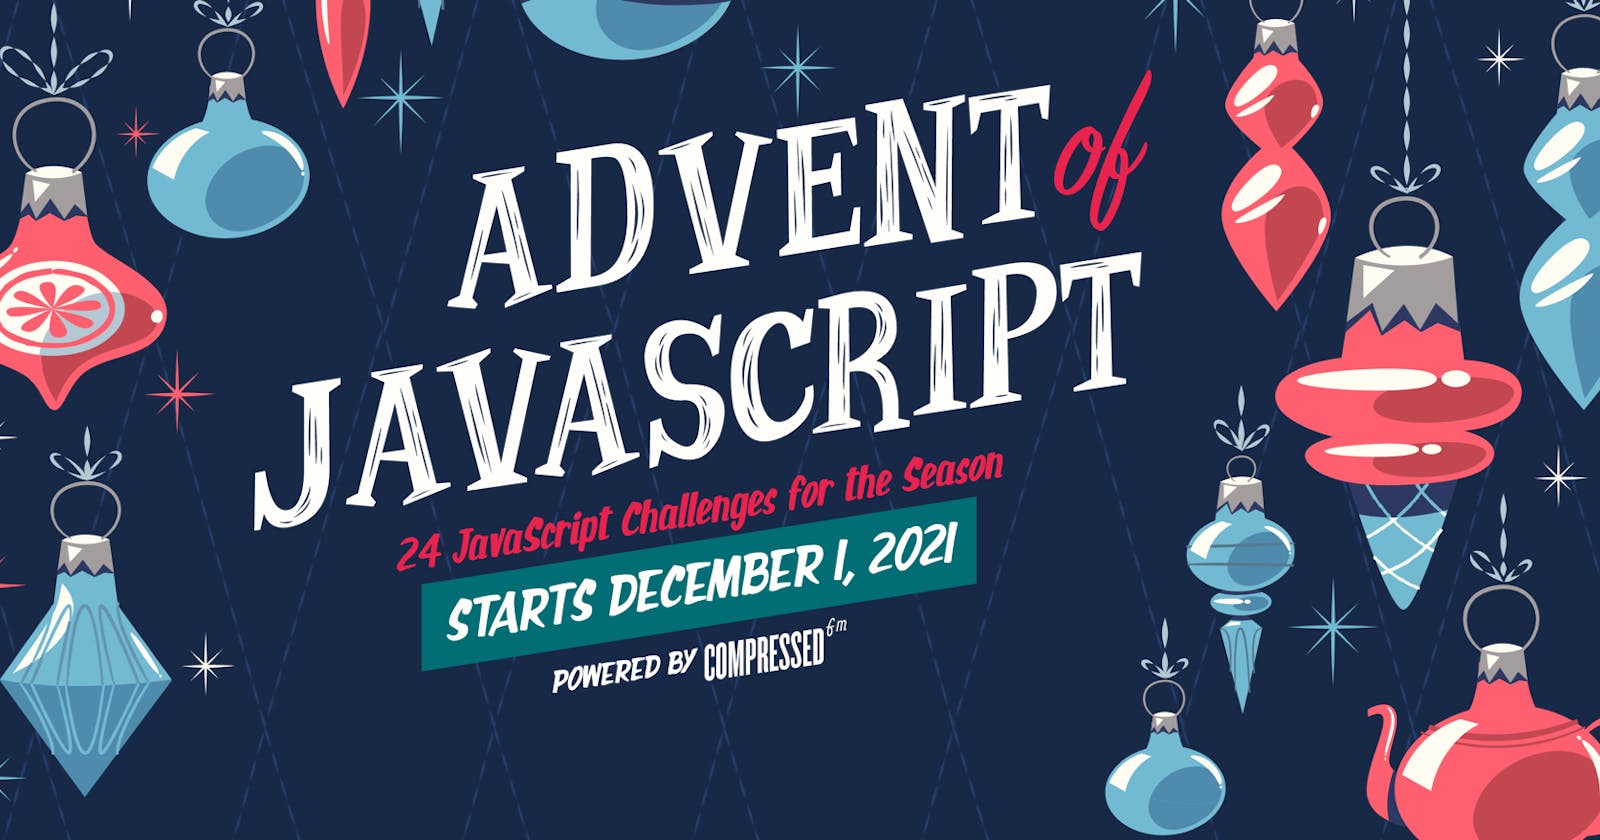 Announcing Advent of JavaScript - A FREE Series of JavaScript Challenges